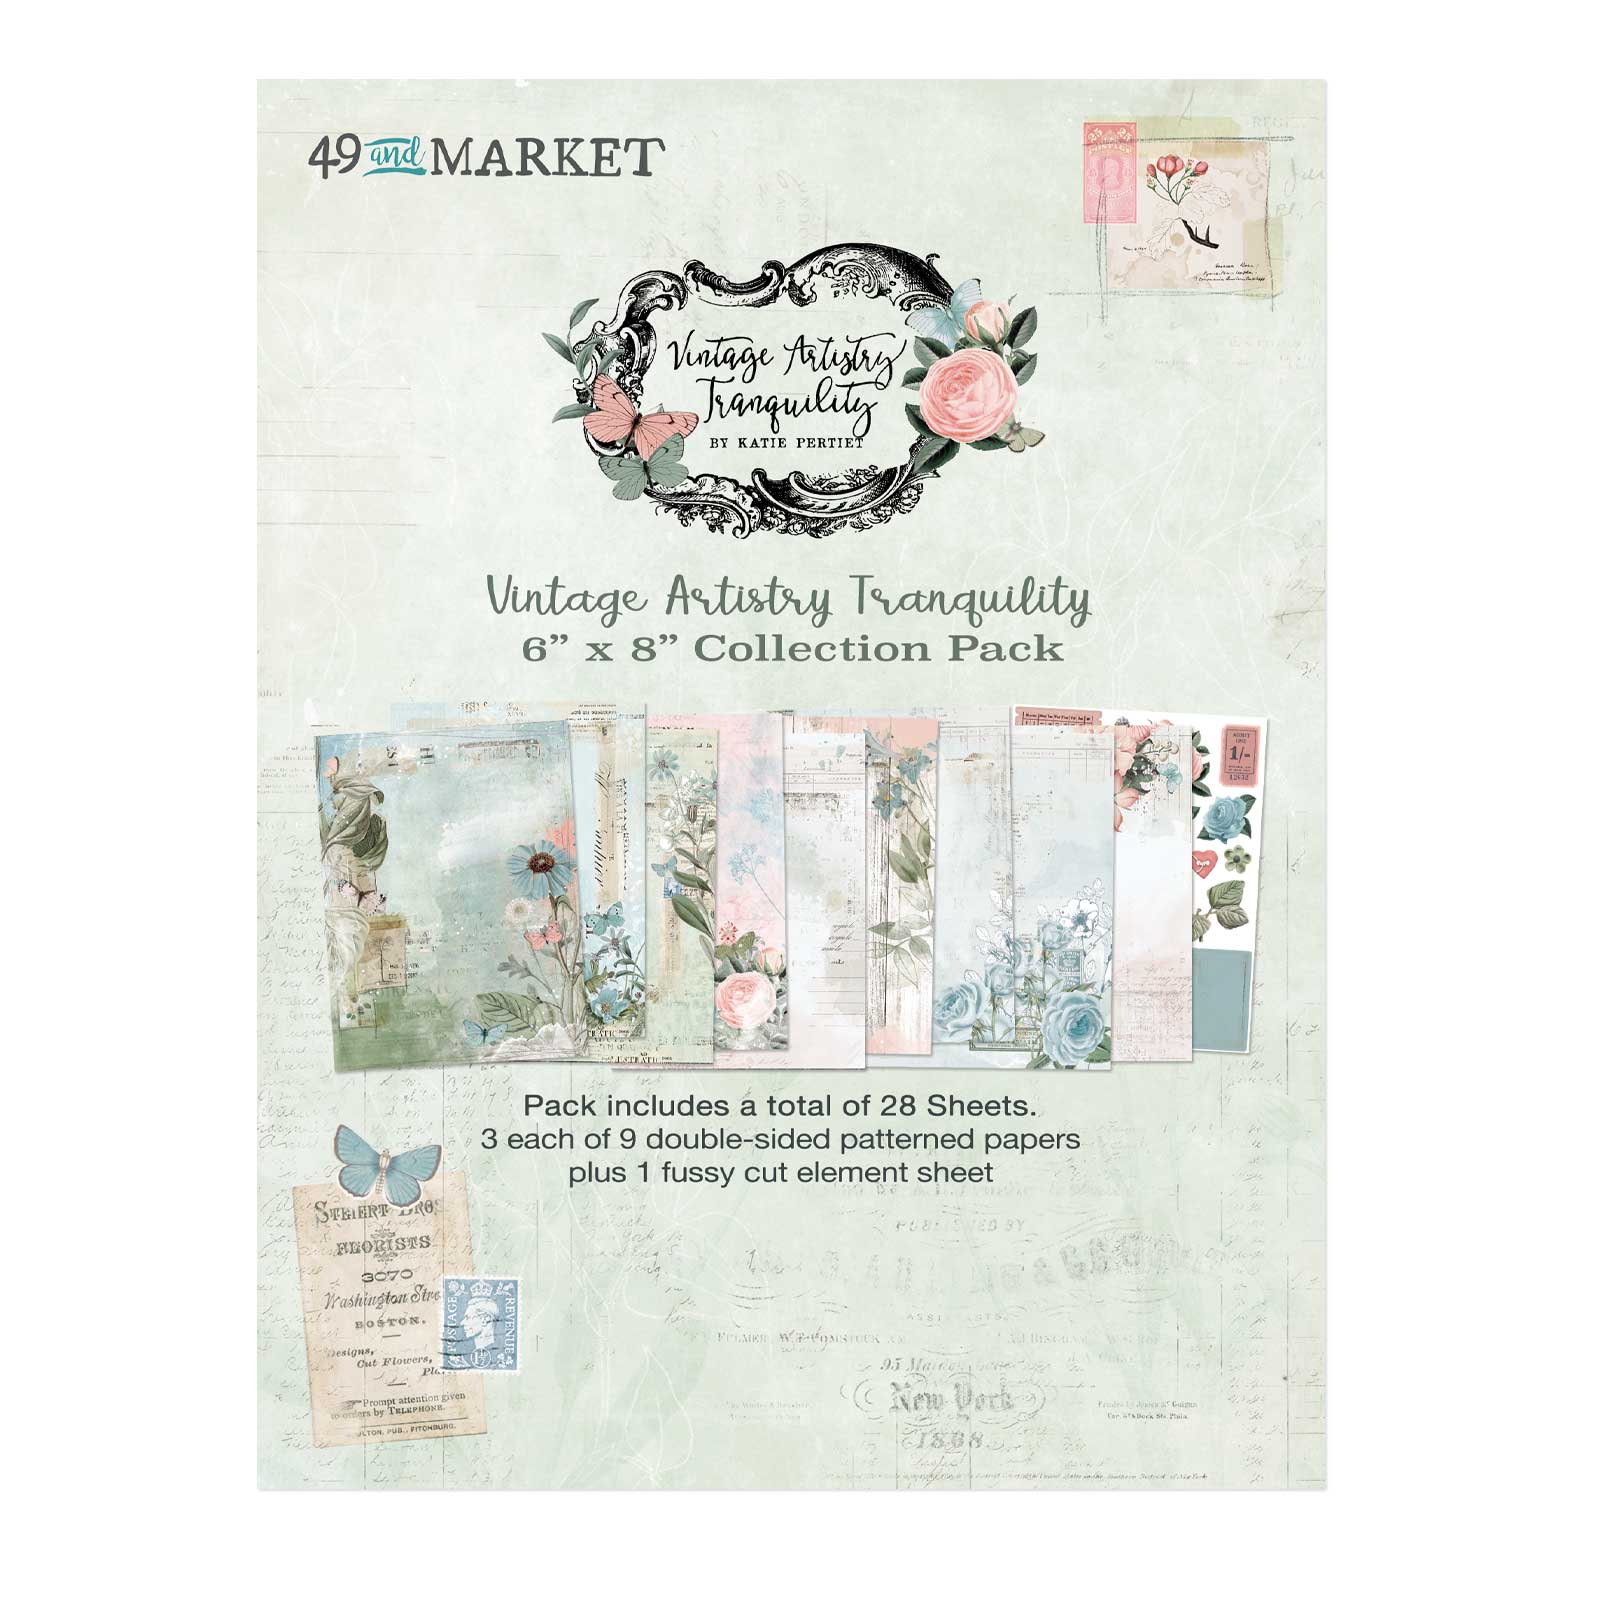 Vintage Artistry Tranquility 6x8 Collection Paper Pack